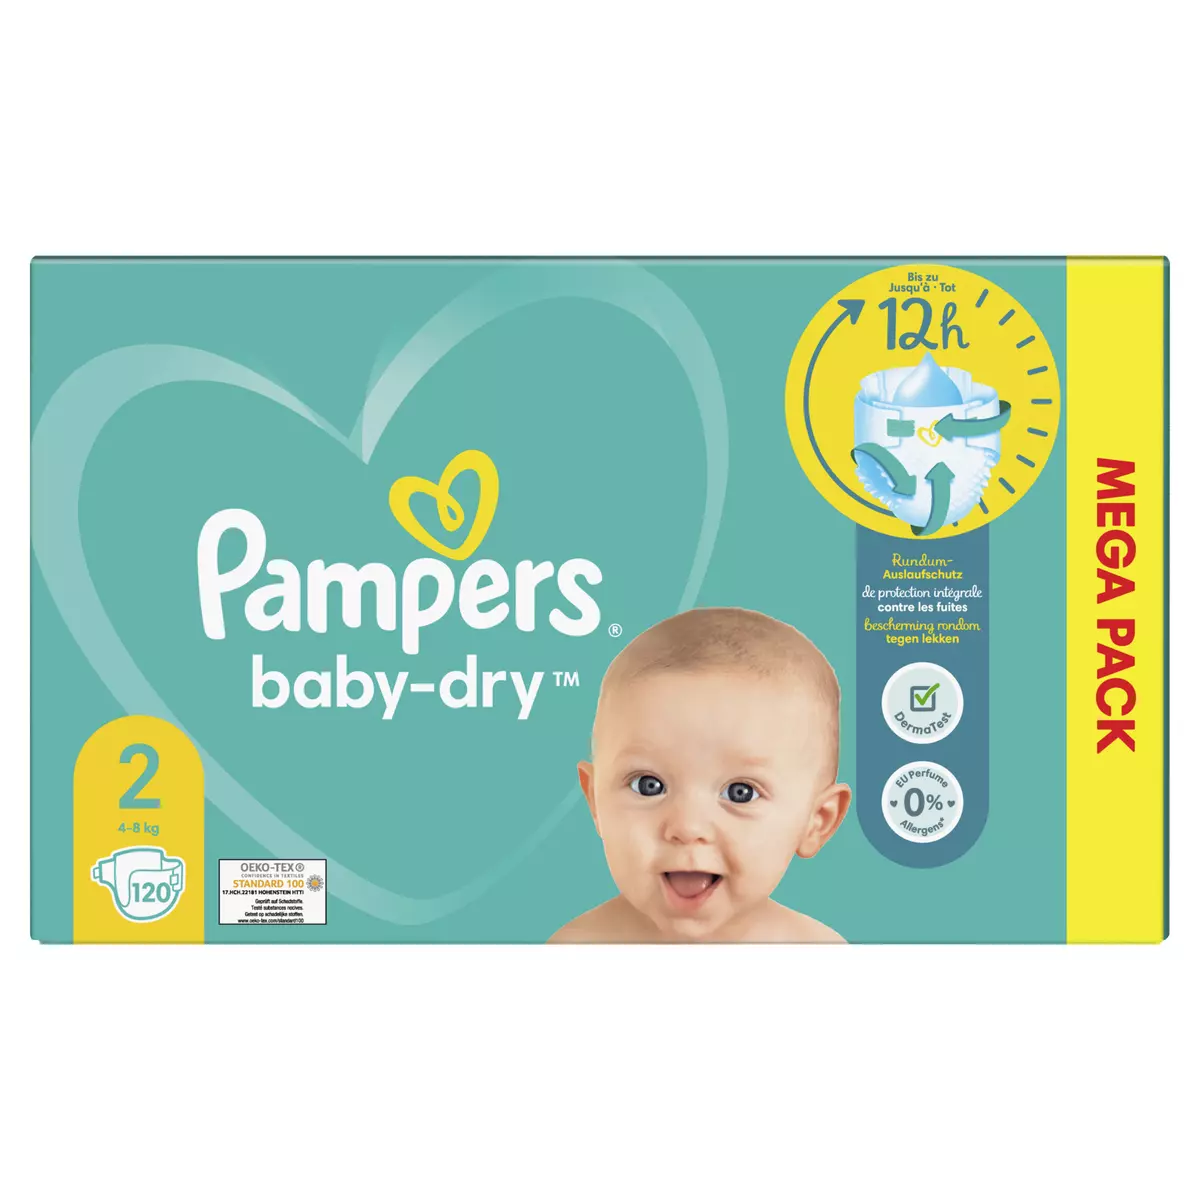 Pampers Harmonie Couches Taille 2, 48 Couches, 4Kg - 8Kg au